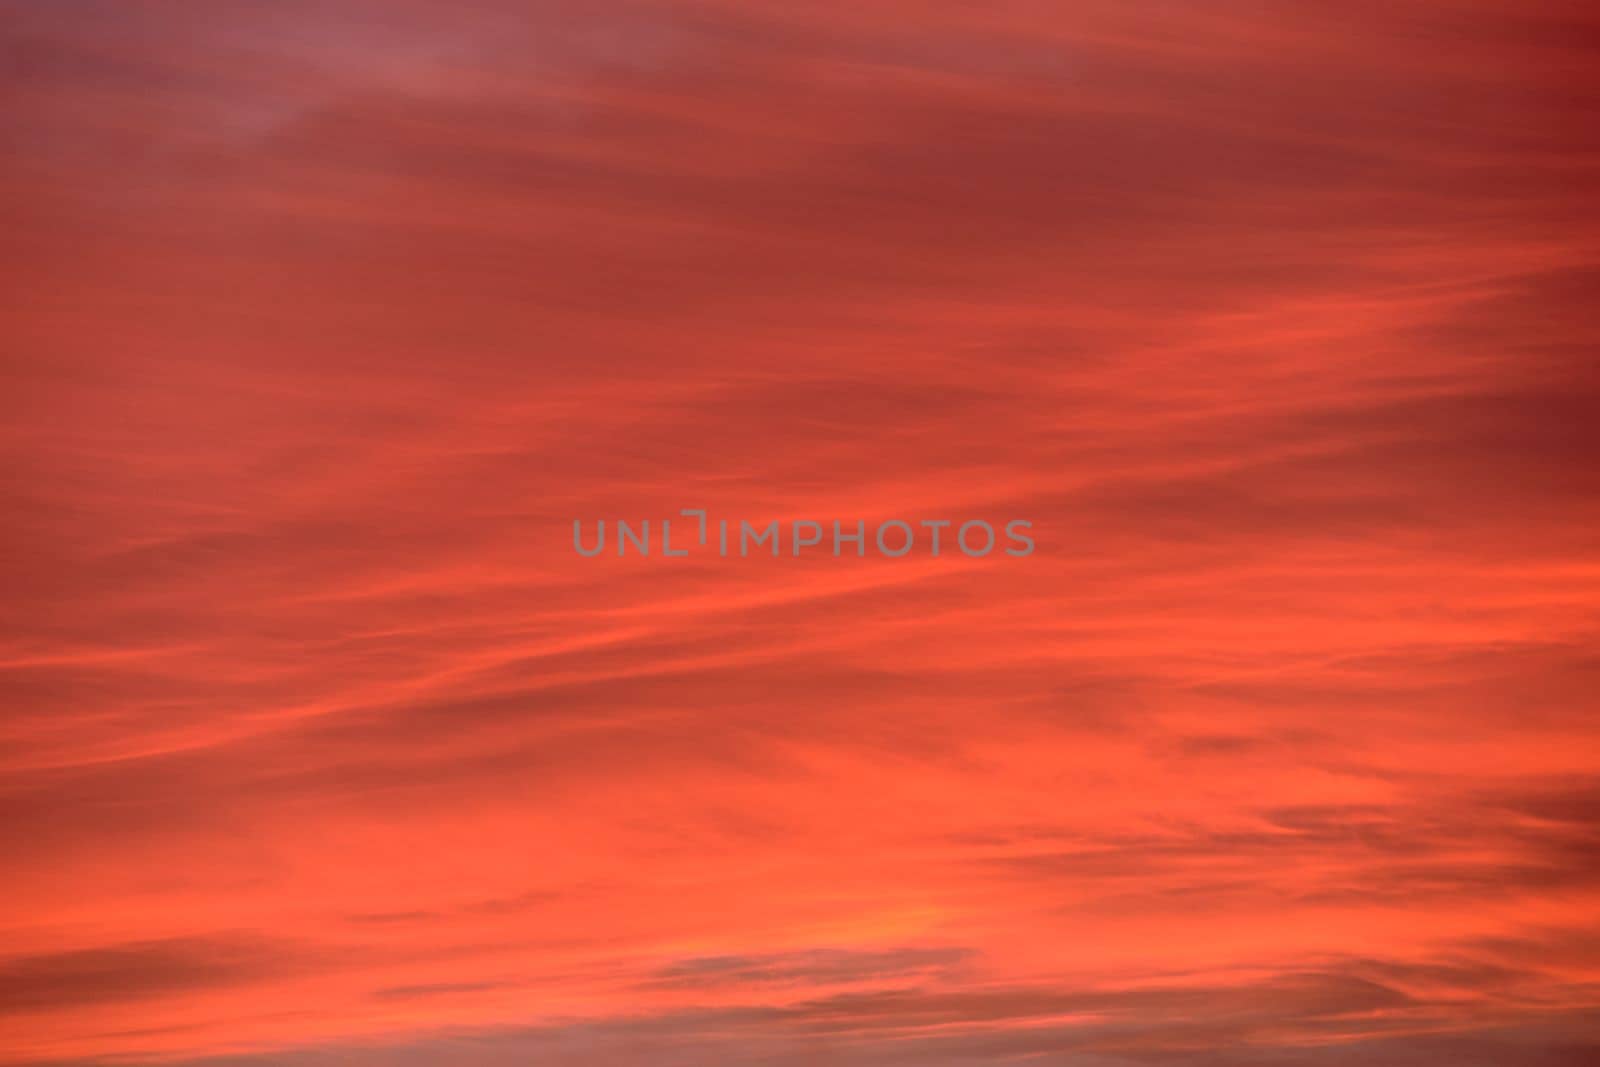 Sky light after sunset. orange background, clouds by raul_ruiz